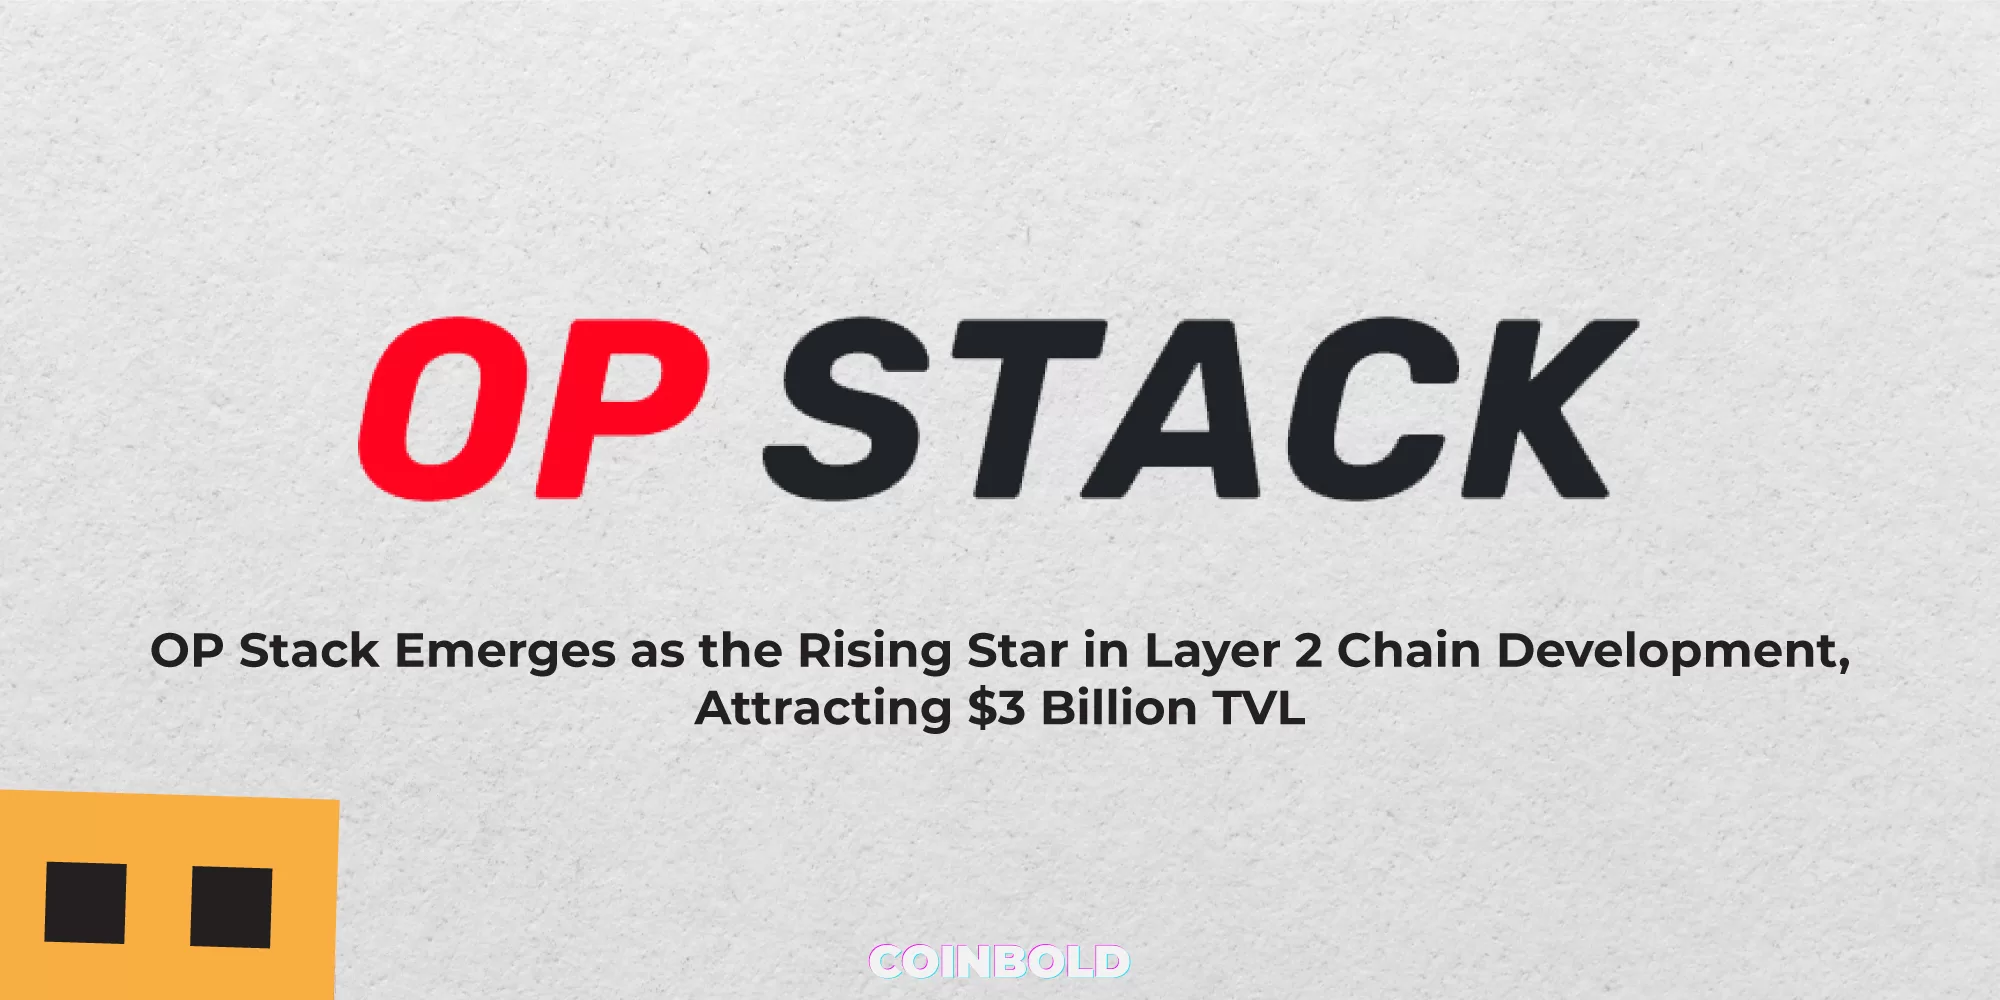 OP Stack Emerges as the Rising Star in Layer 2 Chain Development, Attracting $3 Billion TVL